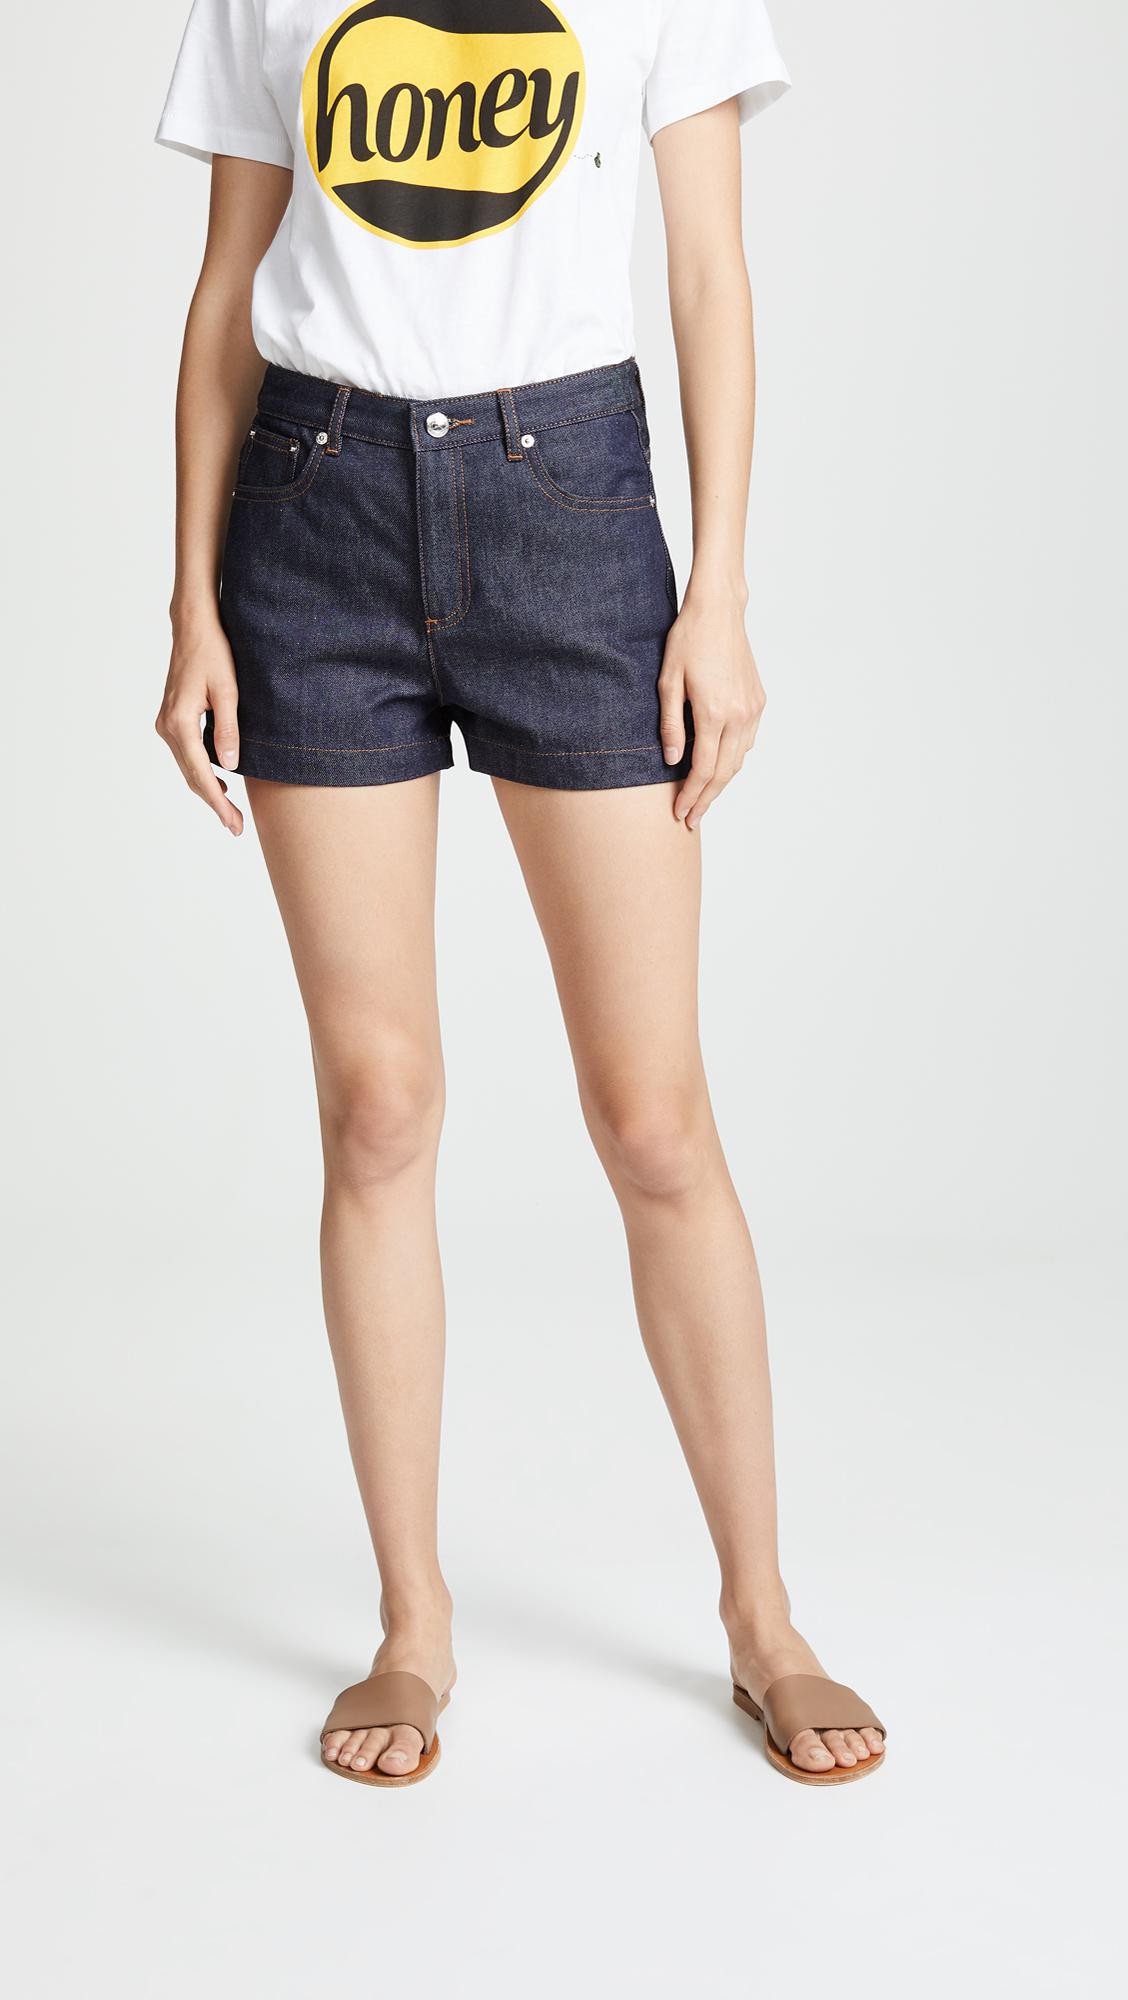 Tether Emptiness truth apc denim shorts Sensitive Awesome By